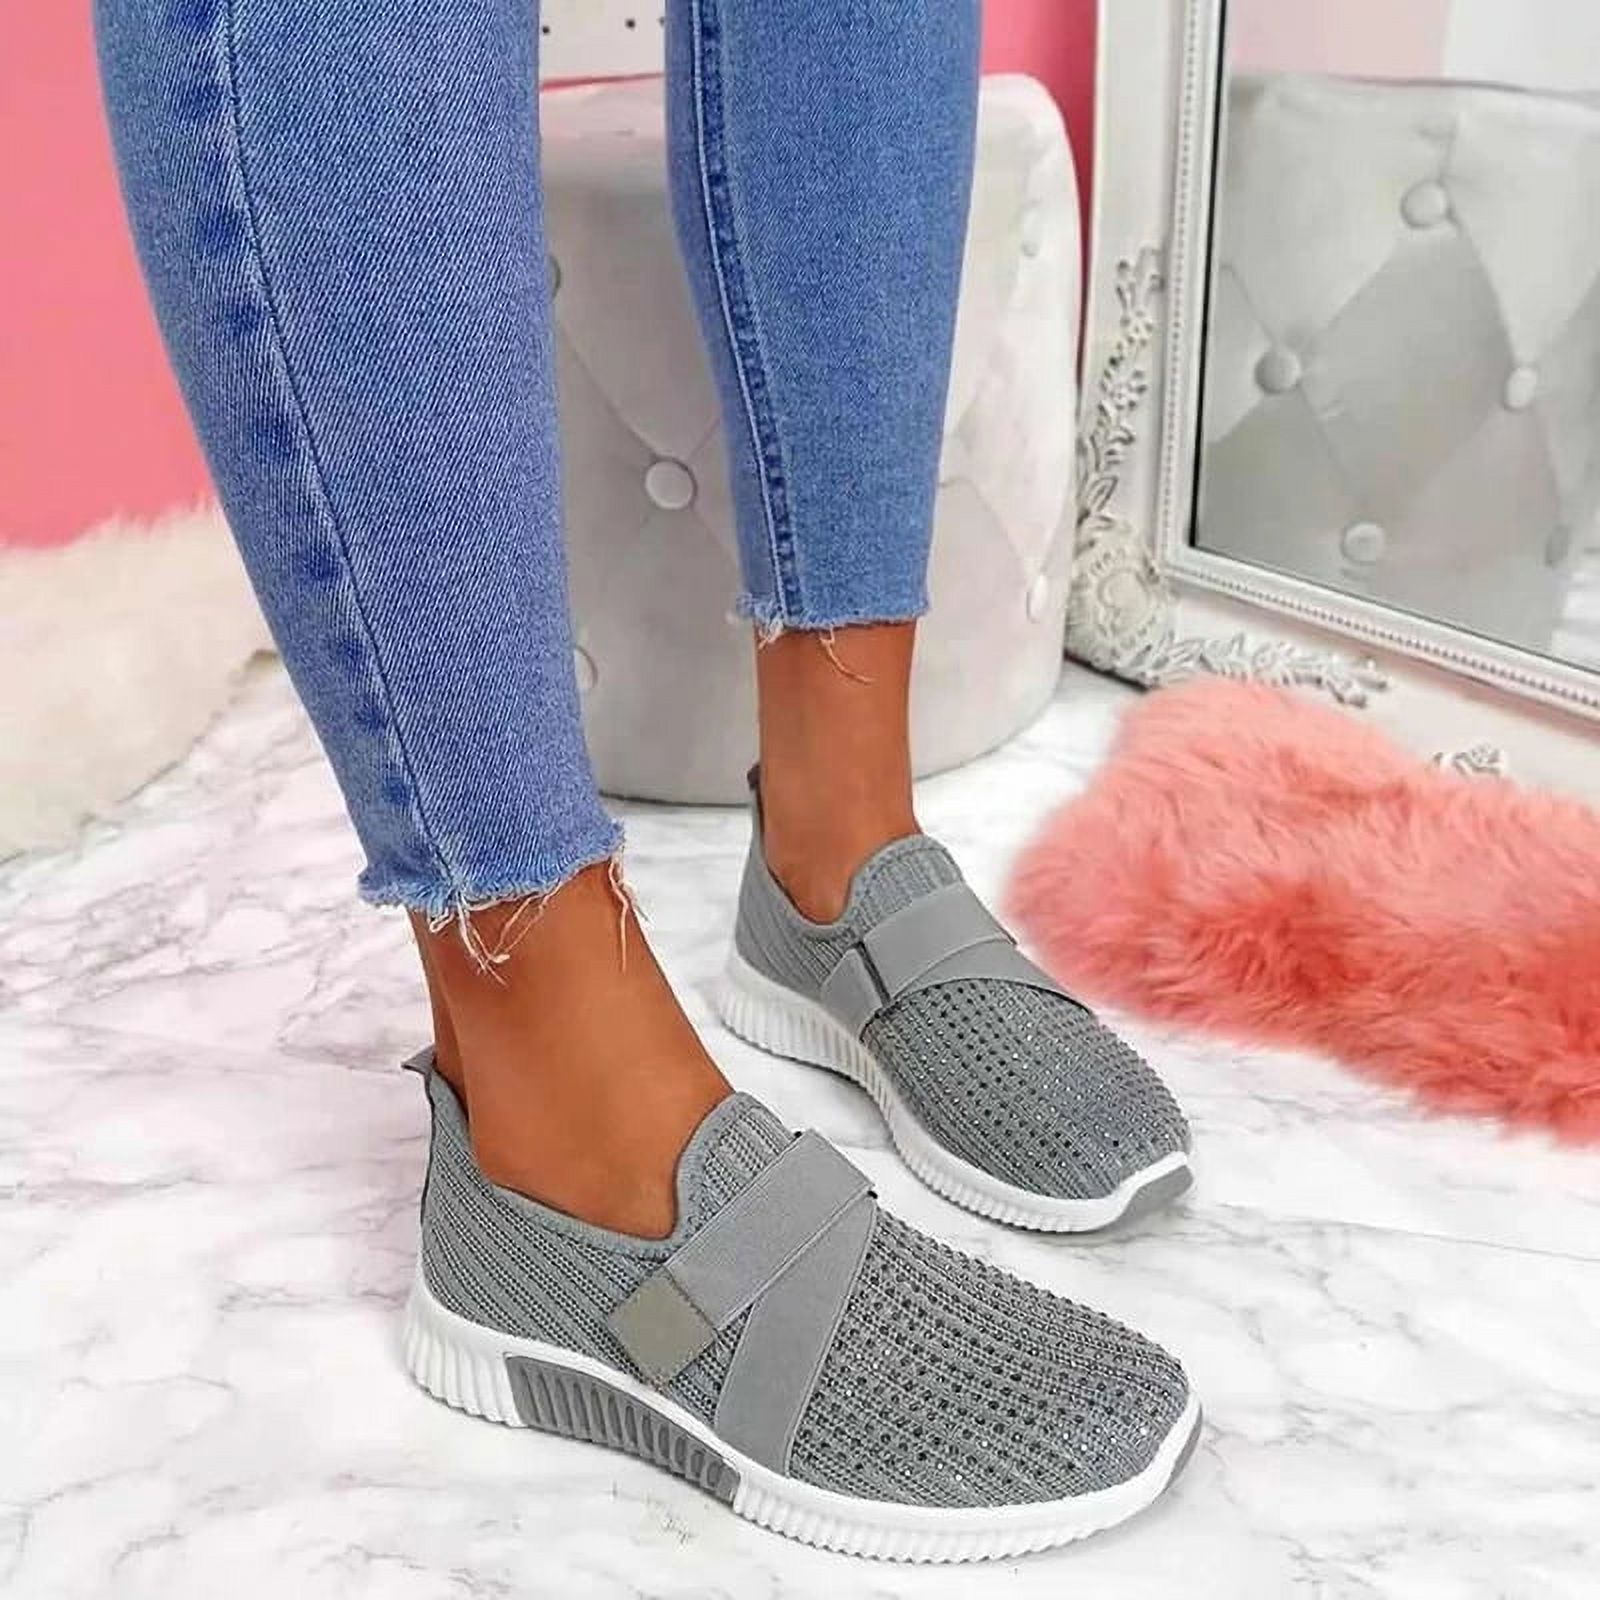 Slip-on Shoes with Orthopedic Sole Women's Fashion Sneakers Platform ...